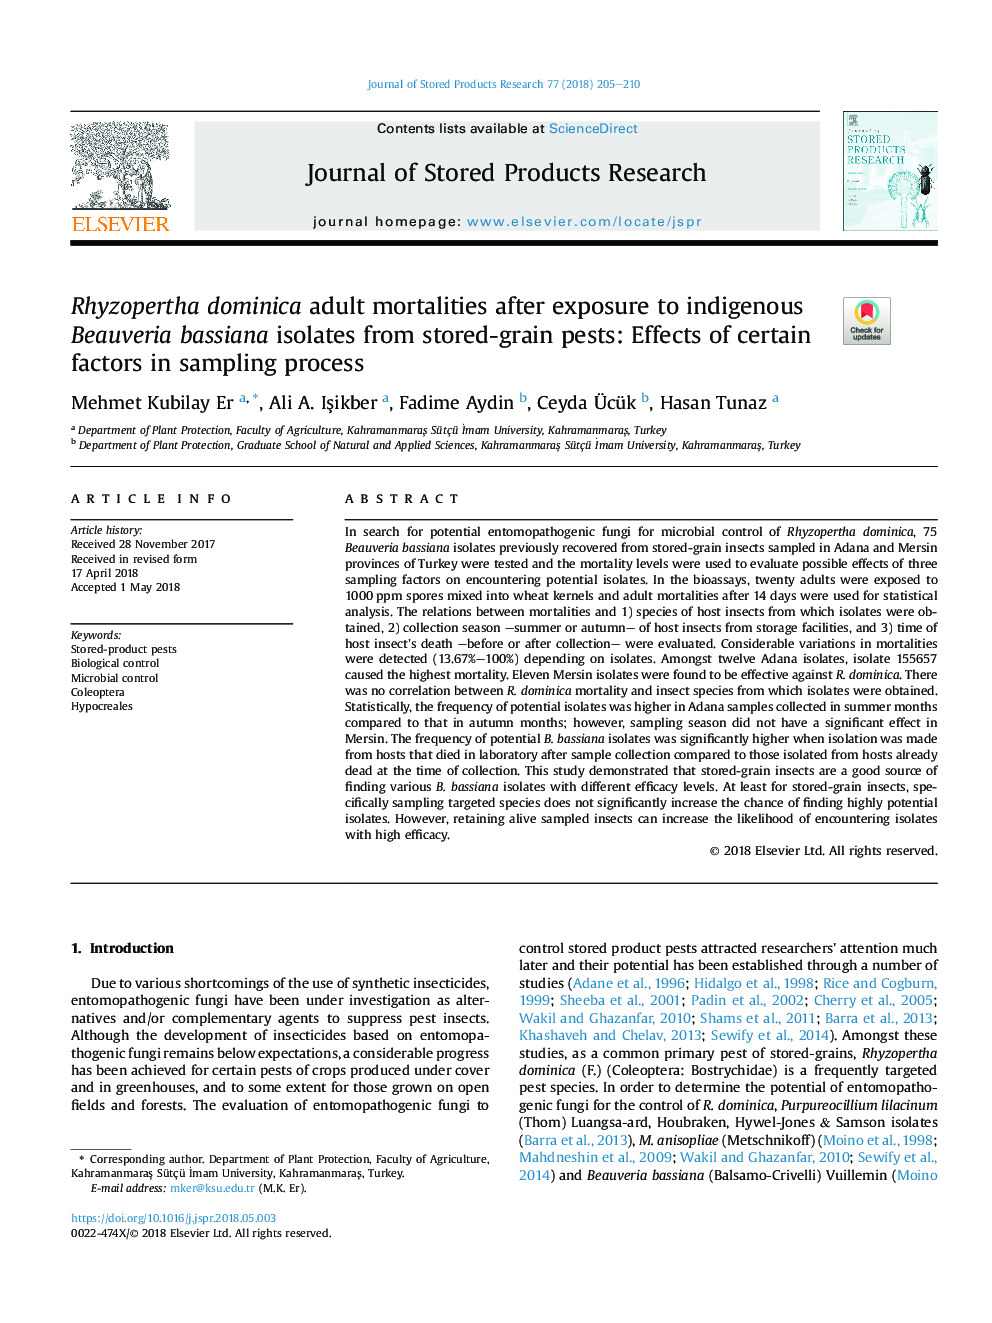 Rhyzopertha dominica adult mortalities after exposure to indigenous Beauveria bassiana isolates from stored-grain pests: Effects of certain factors in sampling process